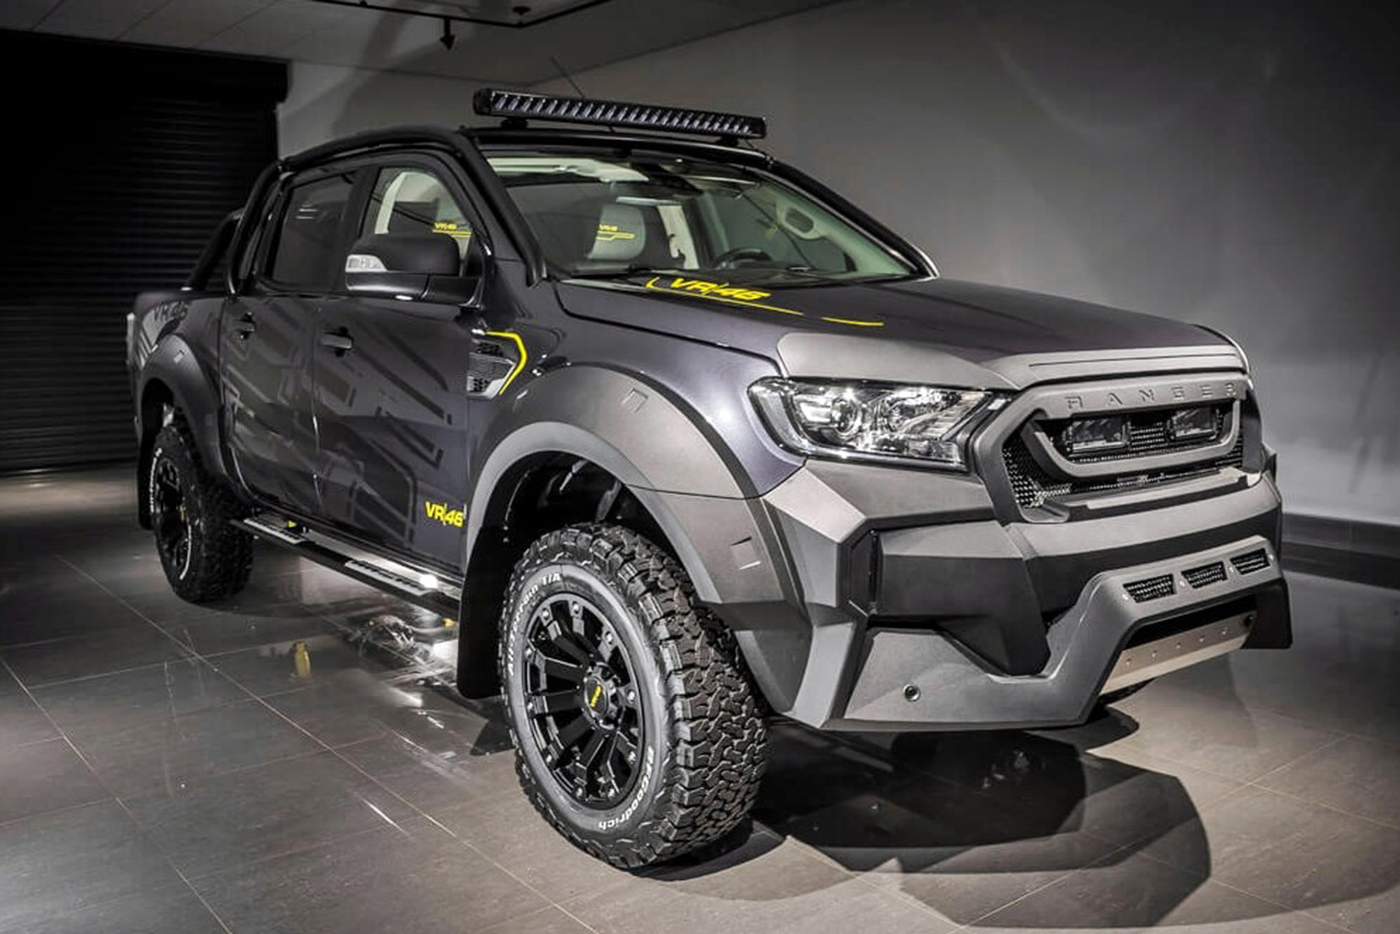 Ford Ranger Valentino Rossi - Bán Tải Offroad Hầm Hố